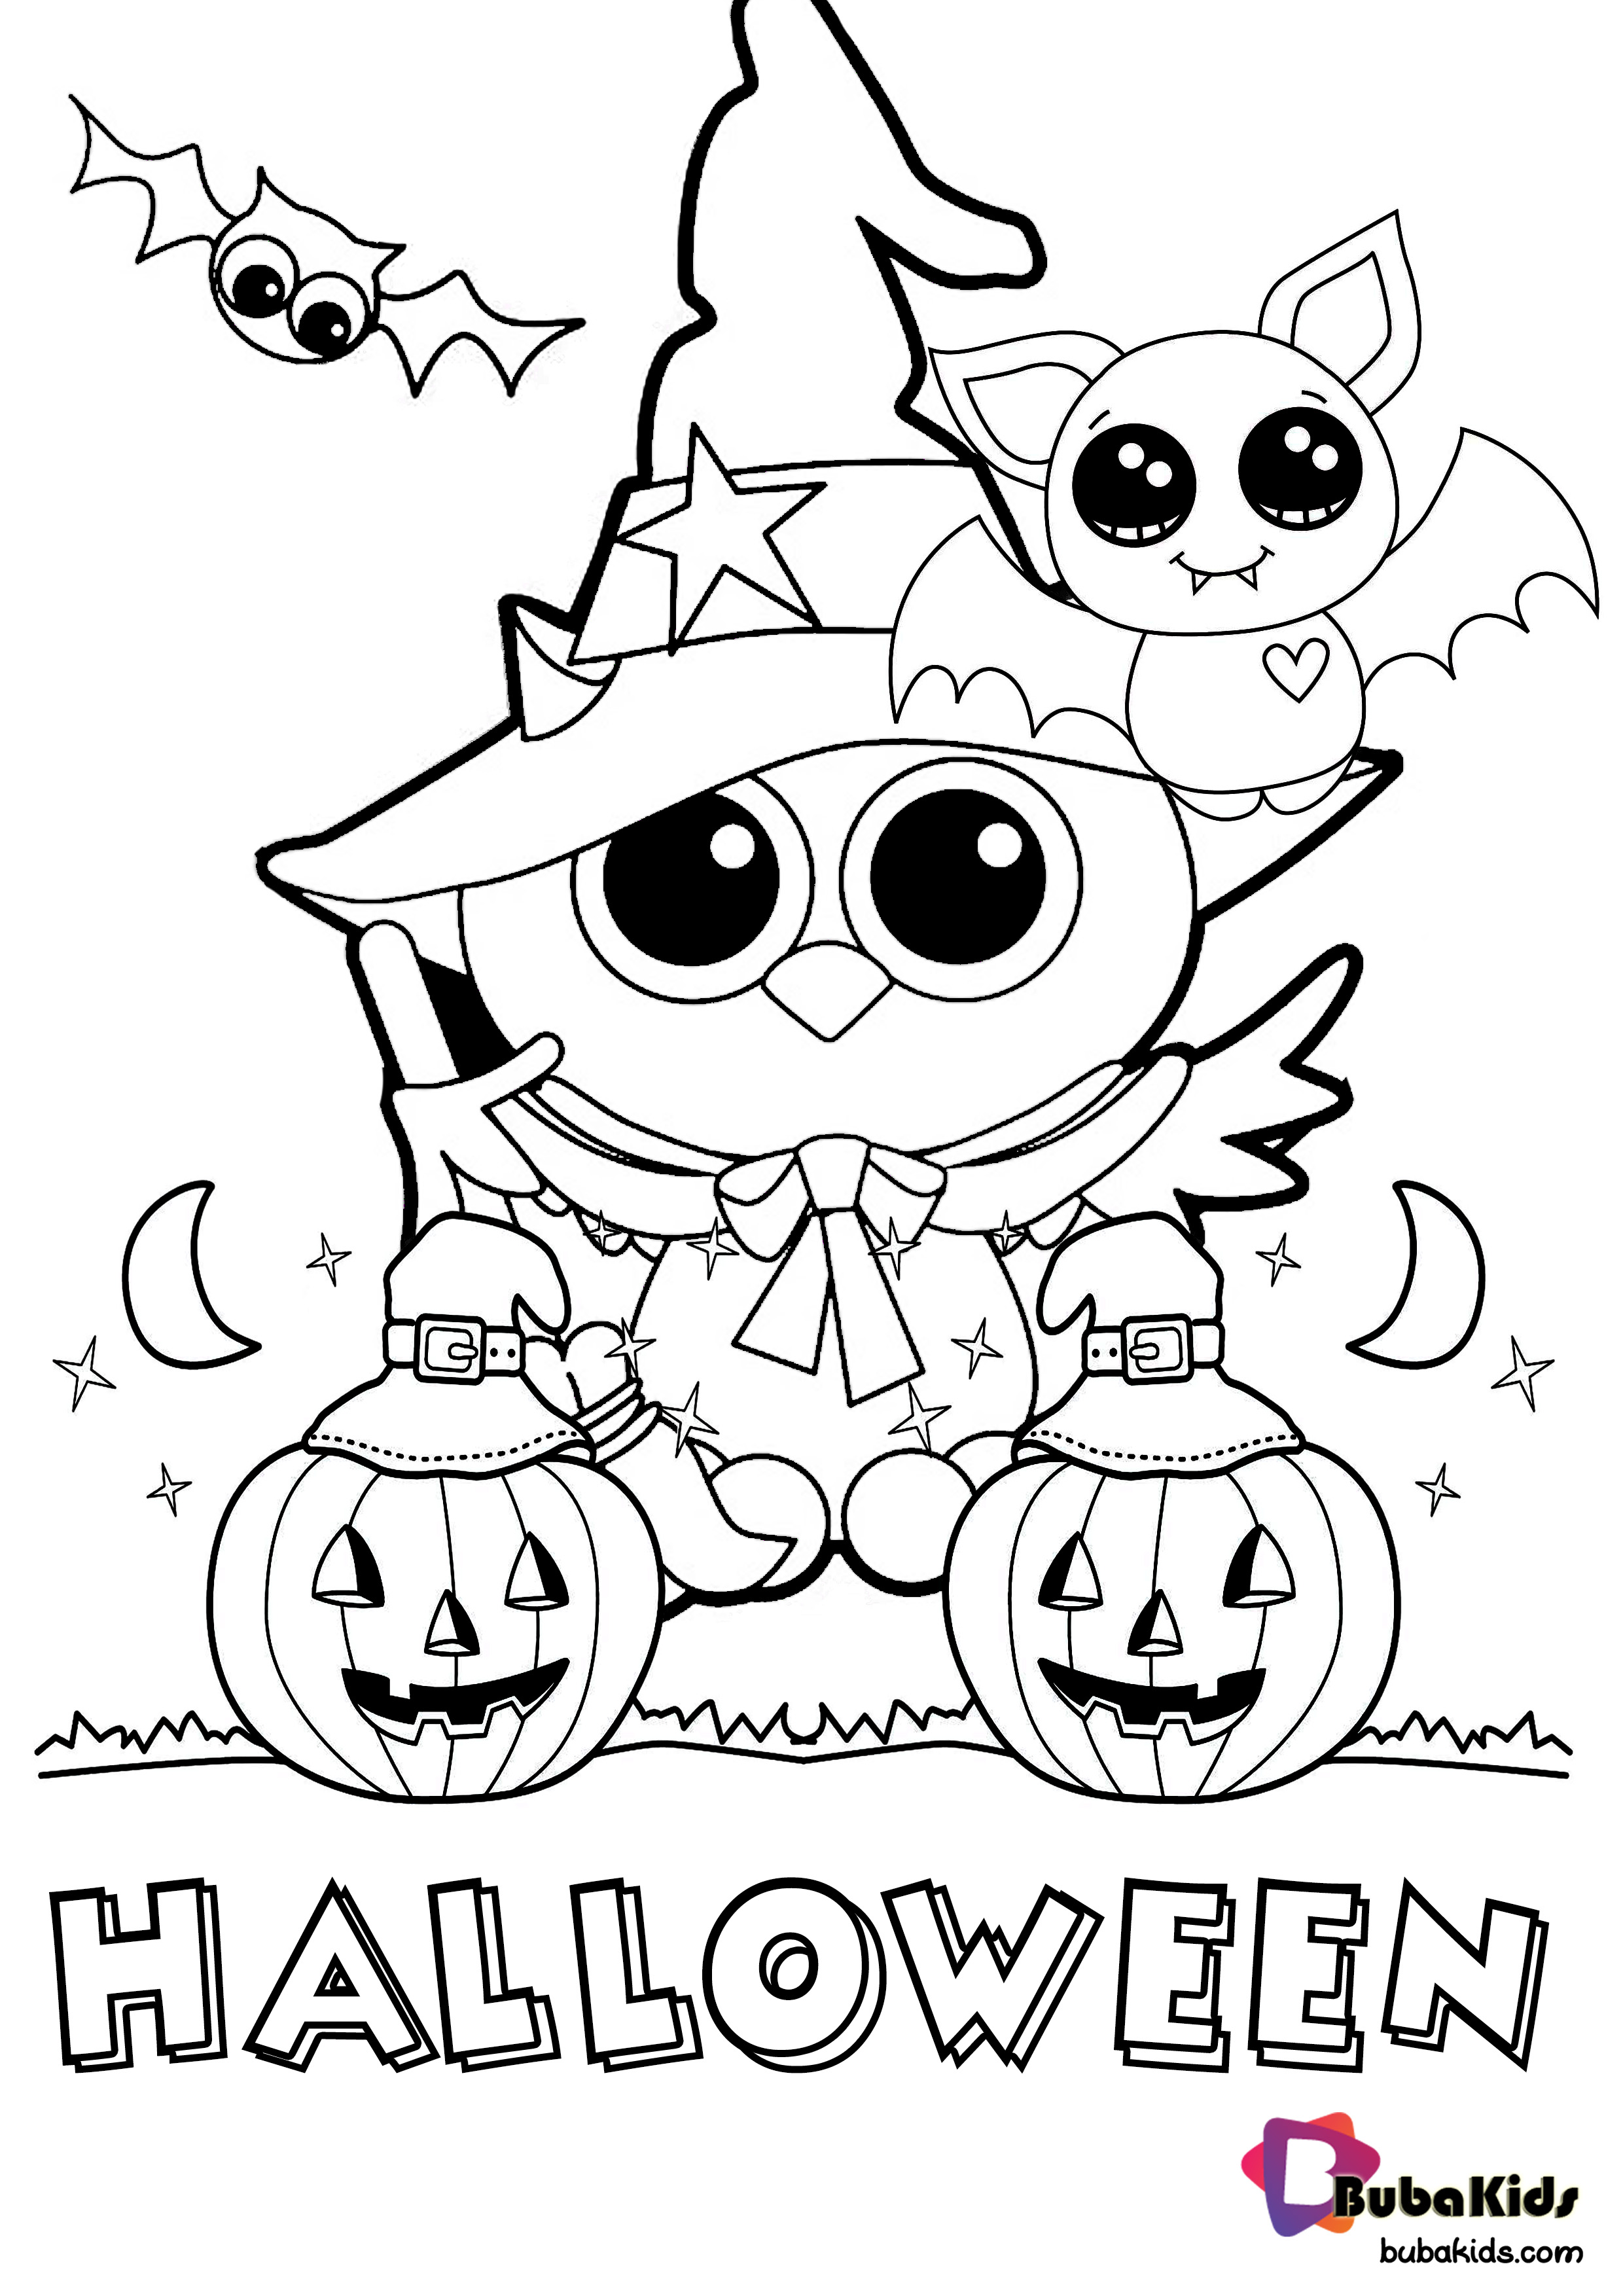 Printable Coloring Pages For Halloween